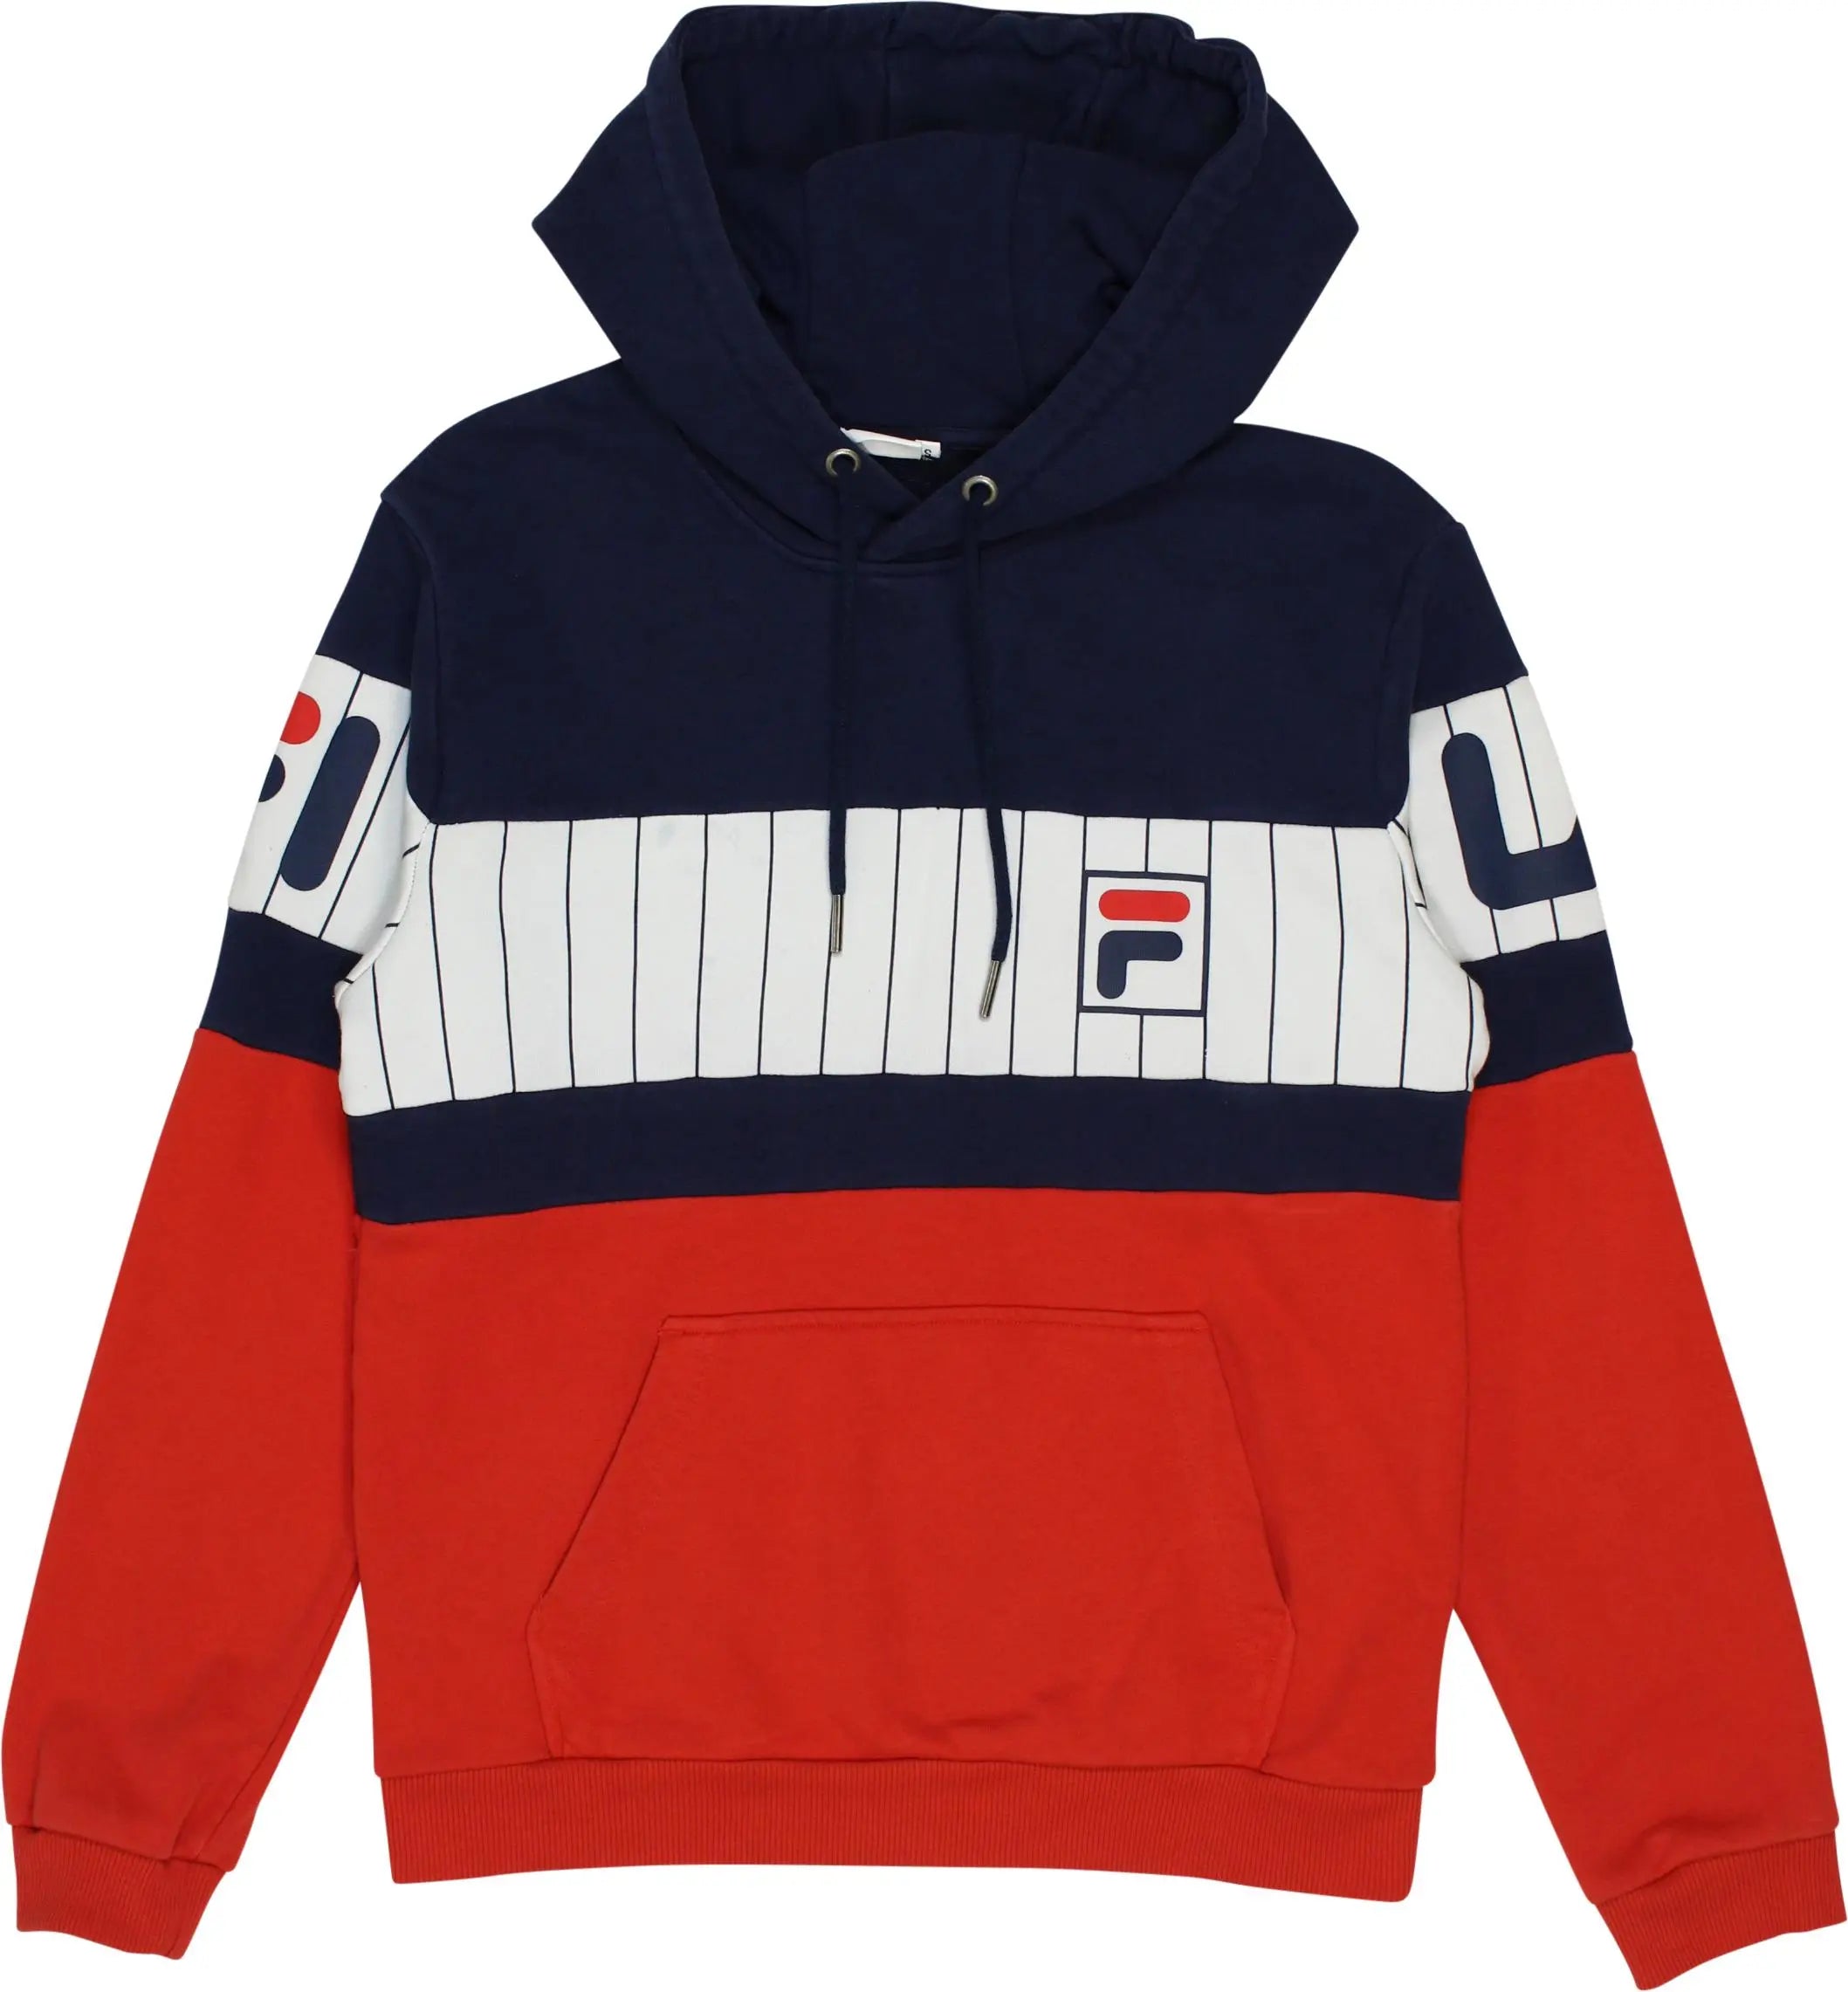 Fila - Hoodie by Fila- ThriftTale.com - Vintage and second handclothing